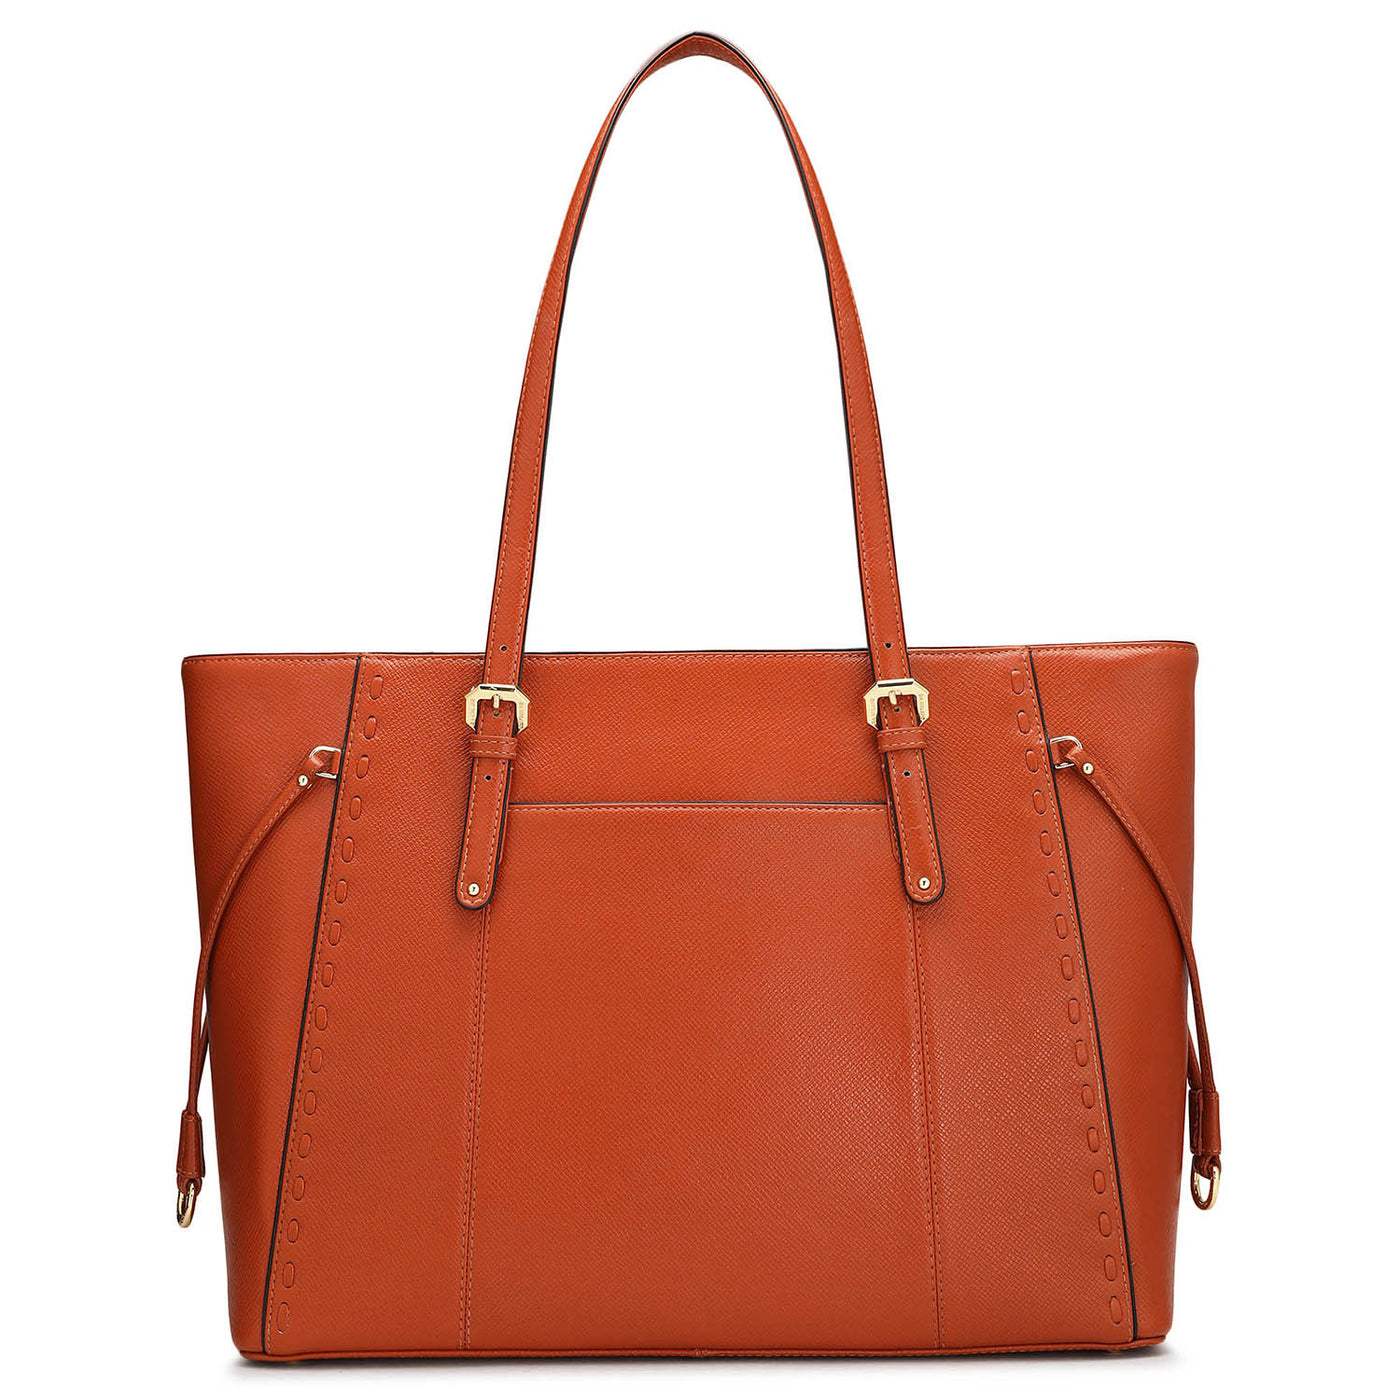 Large Franzy Leather Tote - Rust Orange